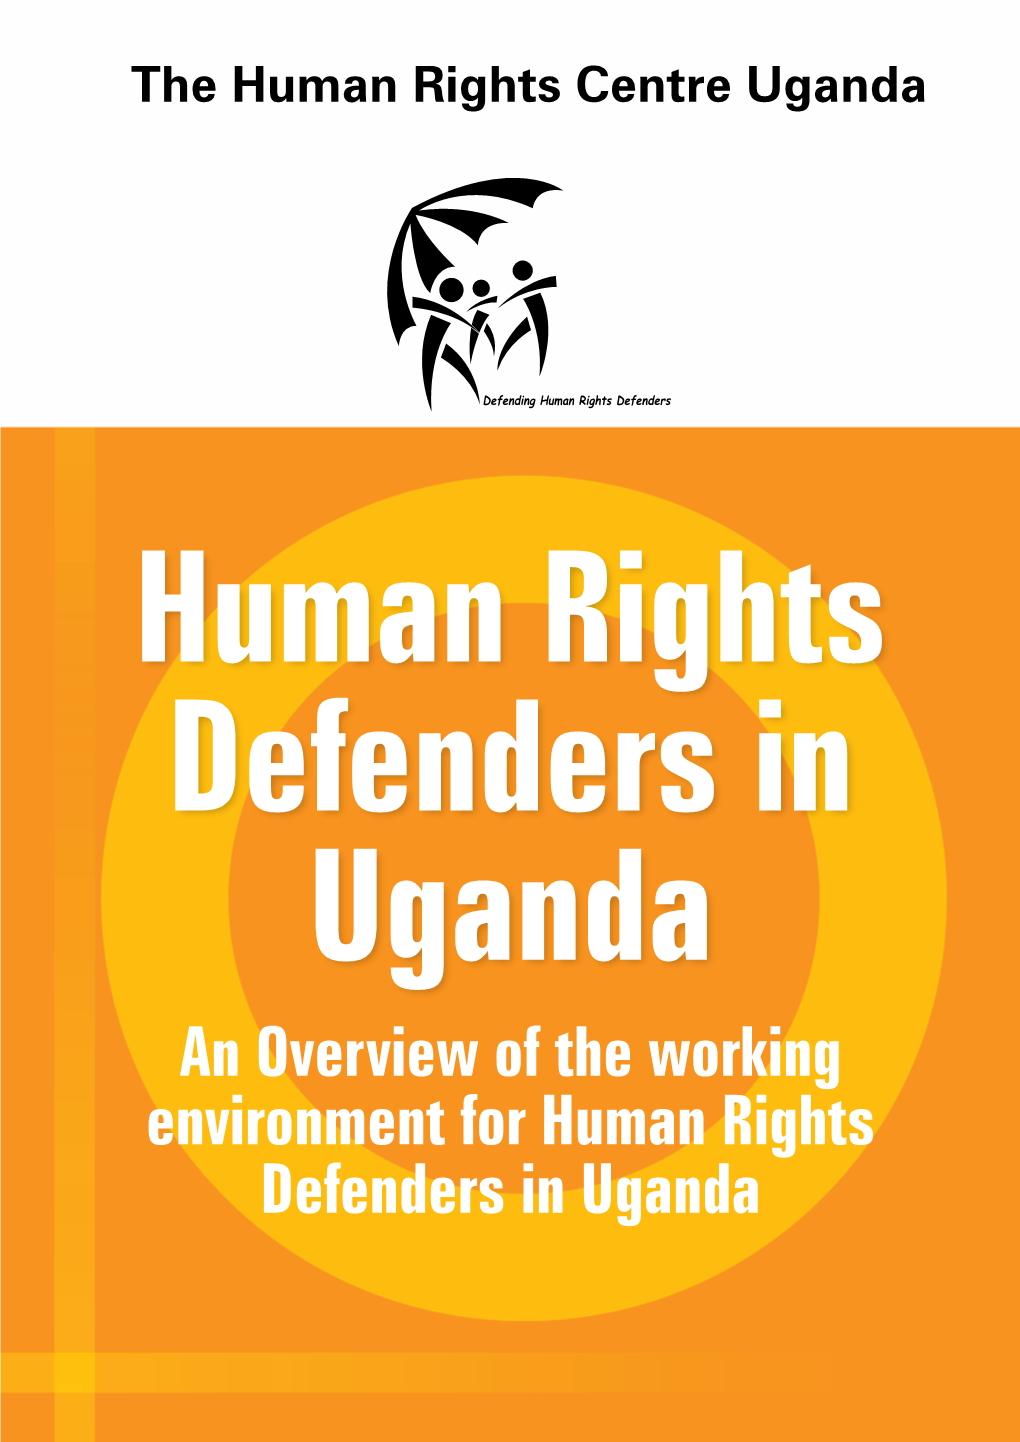 An Overview of the Working Environment for Human Rights Defenders in Uganda